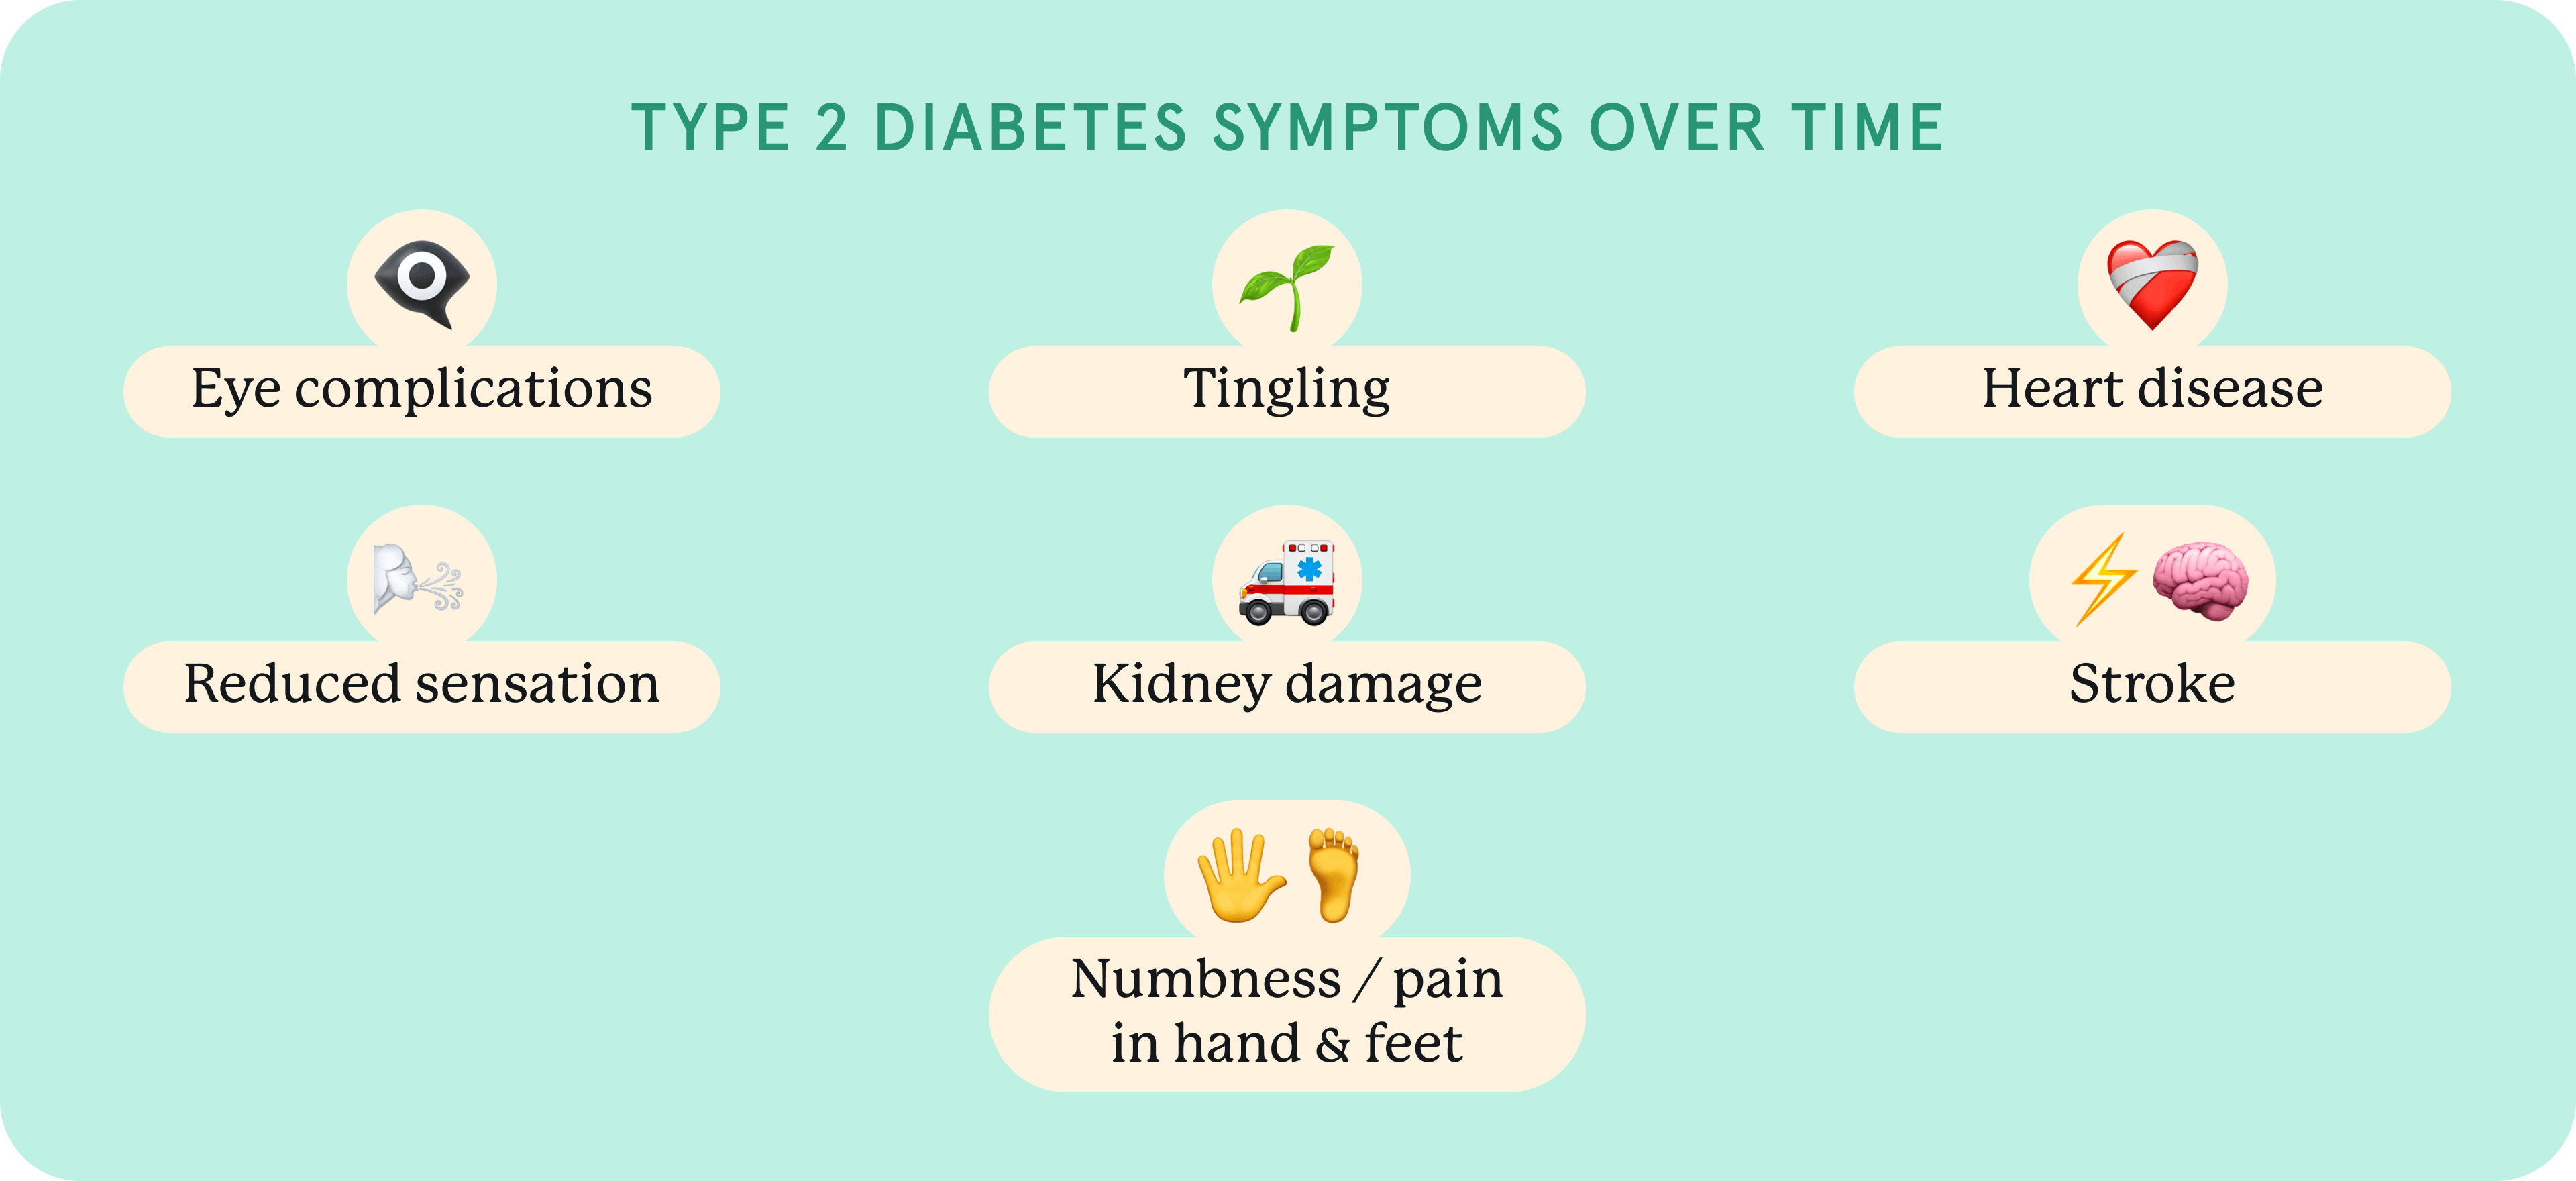 Onset of serious symptoms over time in Type 2 diabetes